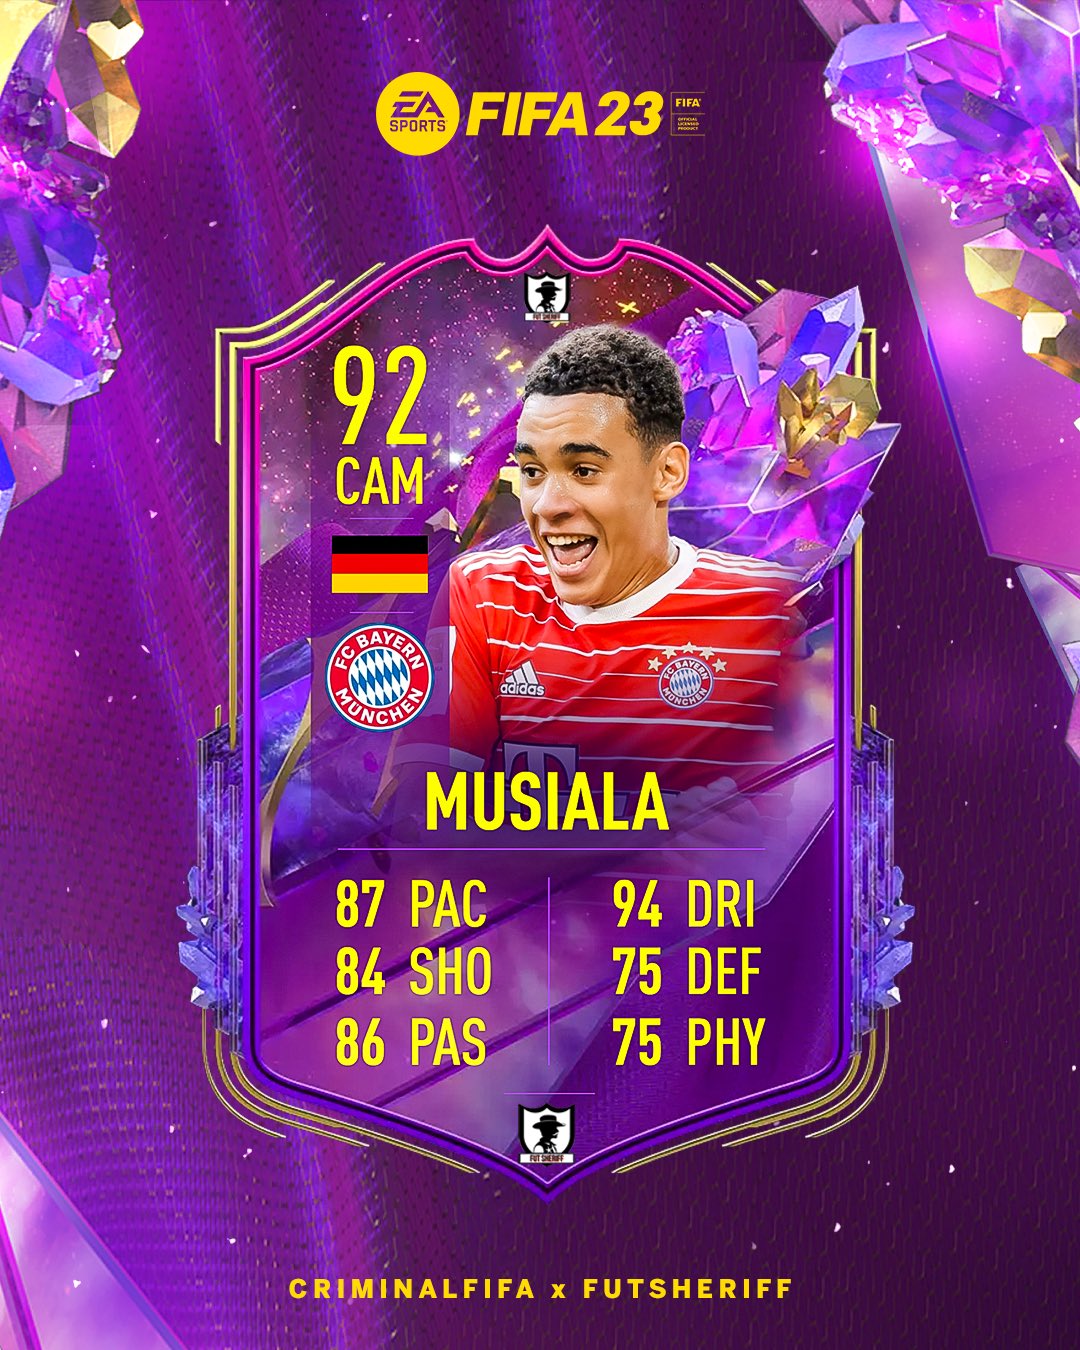 FUT Sheriff - Musiala 🇩🇪 is coming as CENTURIONS TEAM 2✓